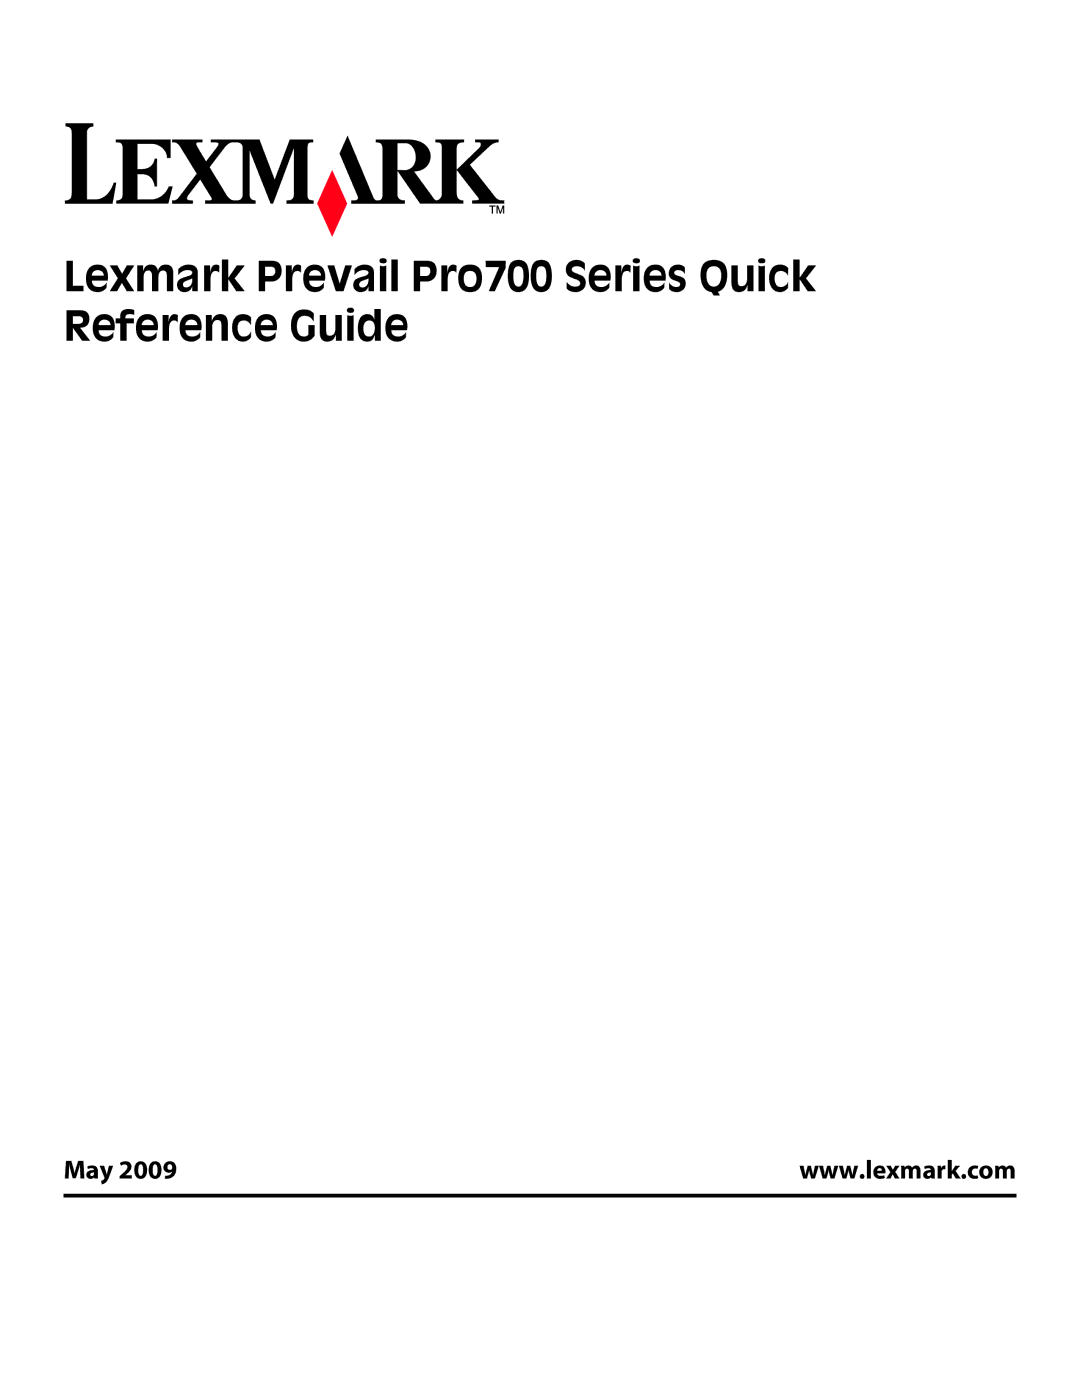 Lexmark PRO700 manual Lexmark Prevail Pro700 Series Quick Reference Guide, May 